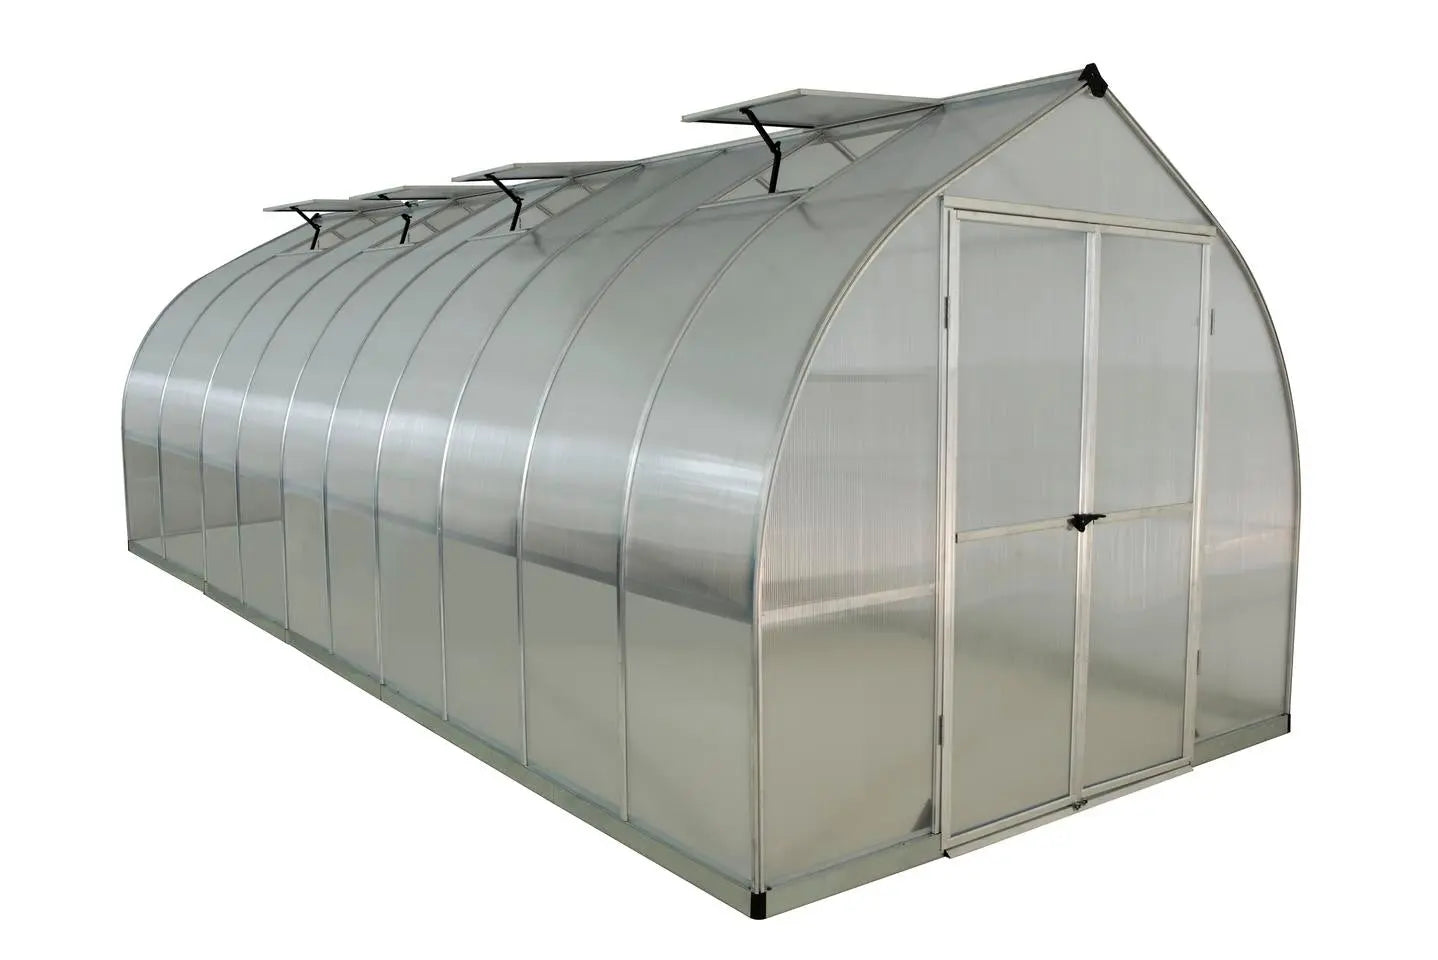 Bella® 8 ft. x 20 ft. Bell Shaped Greenhouse | Palram-Canopia 8' Wide 6mm Bella Canopia by Palram   